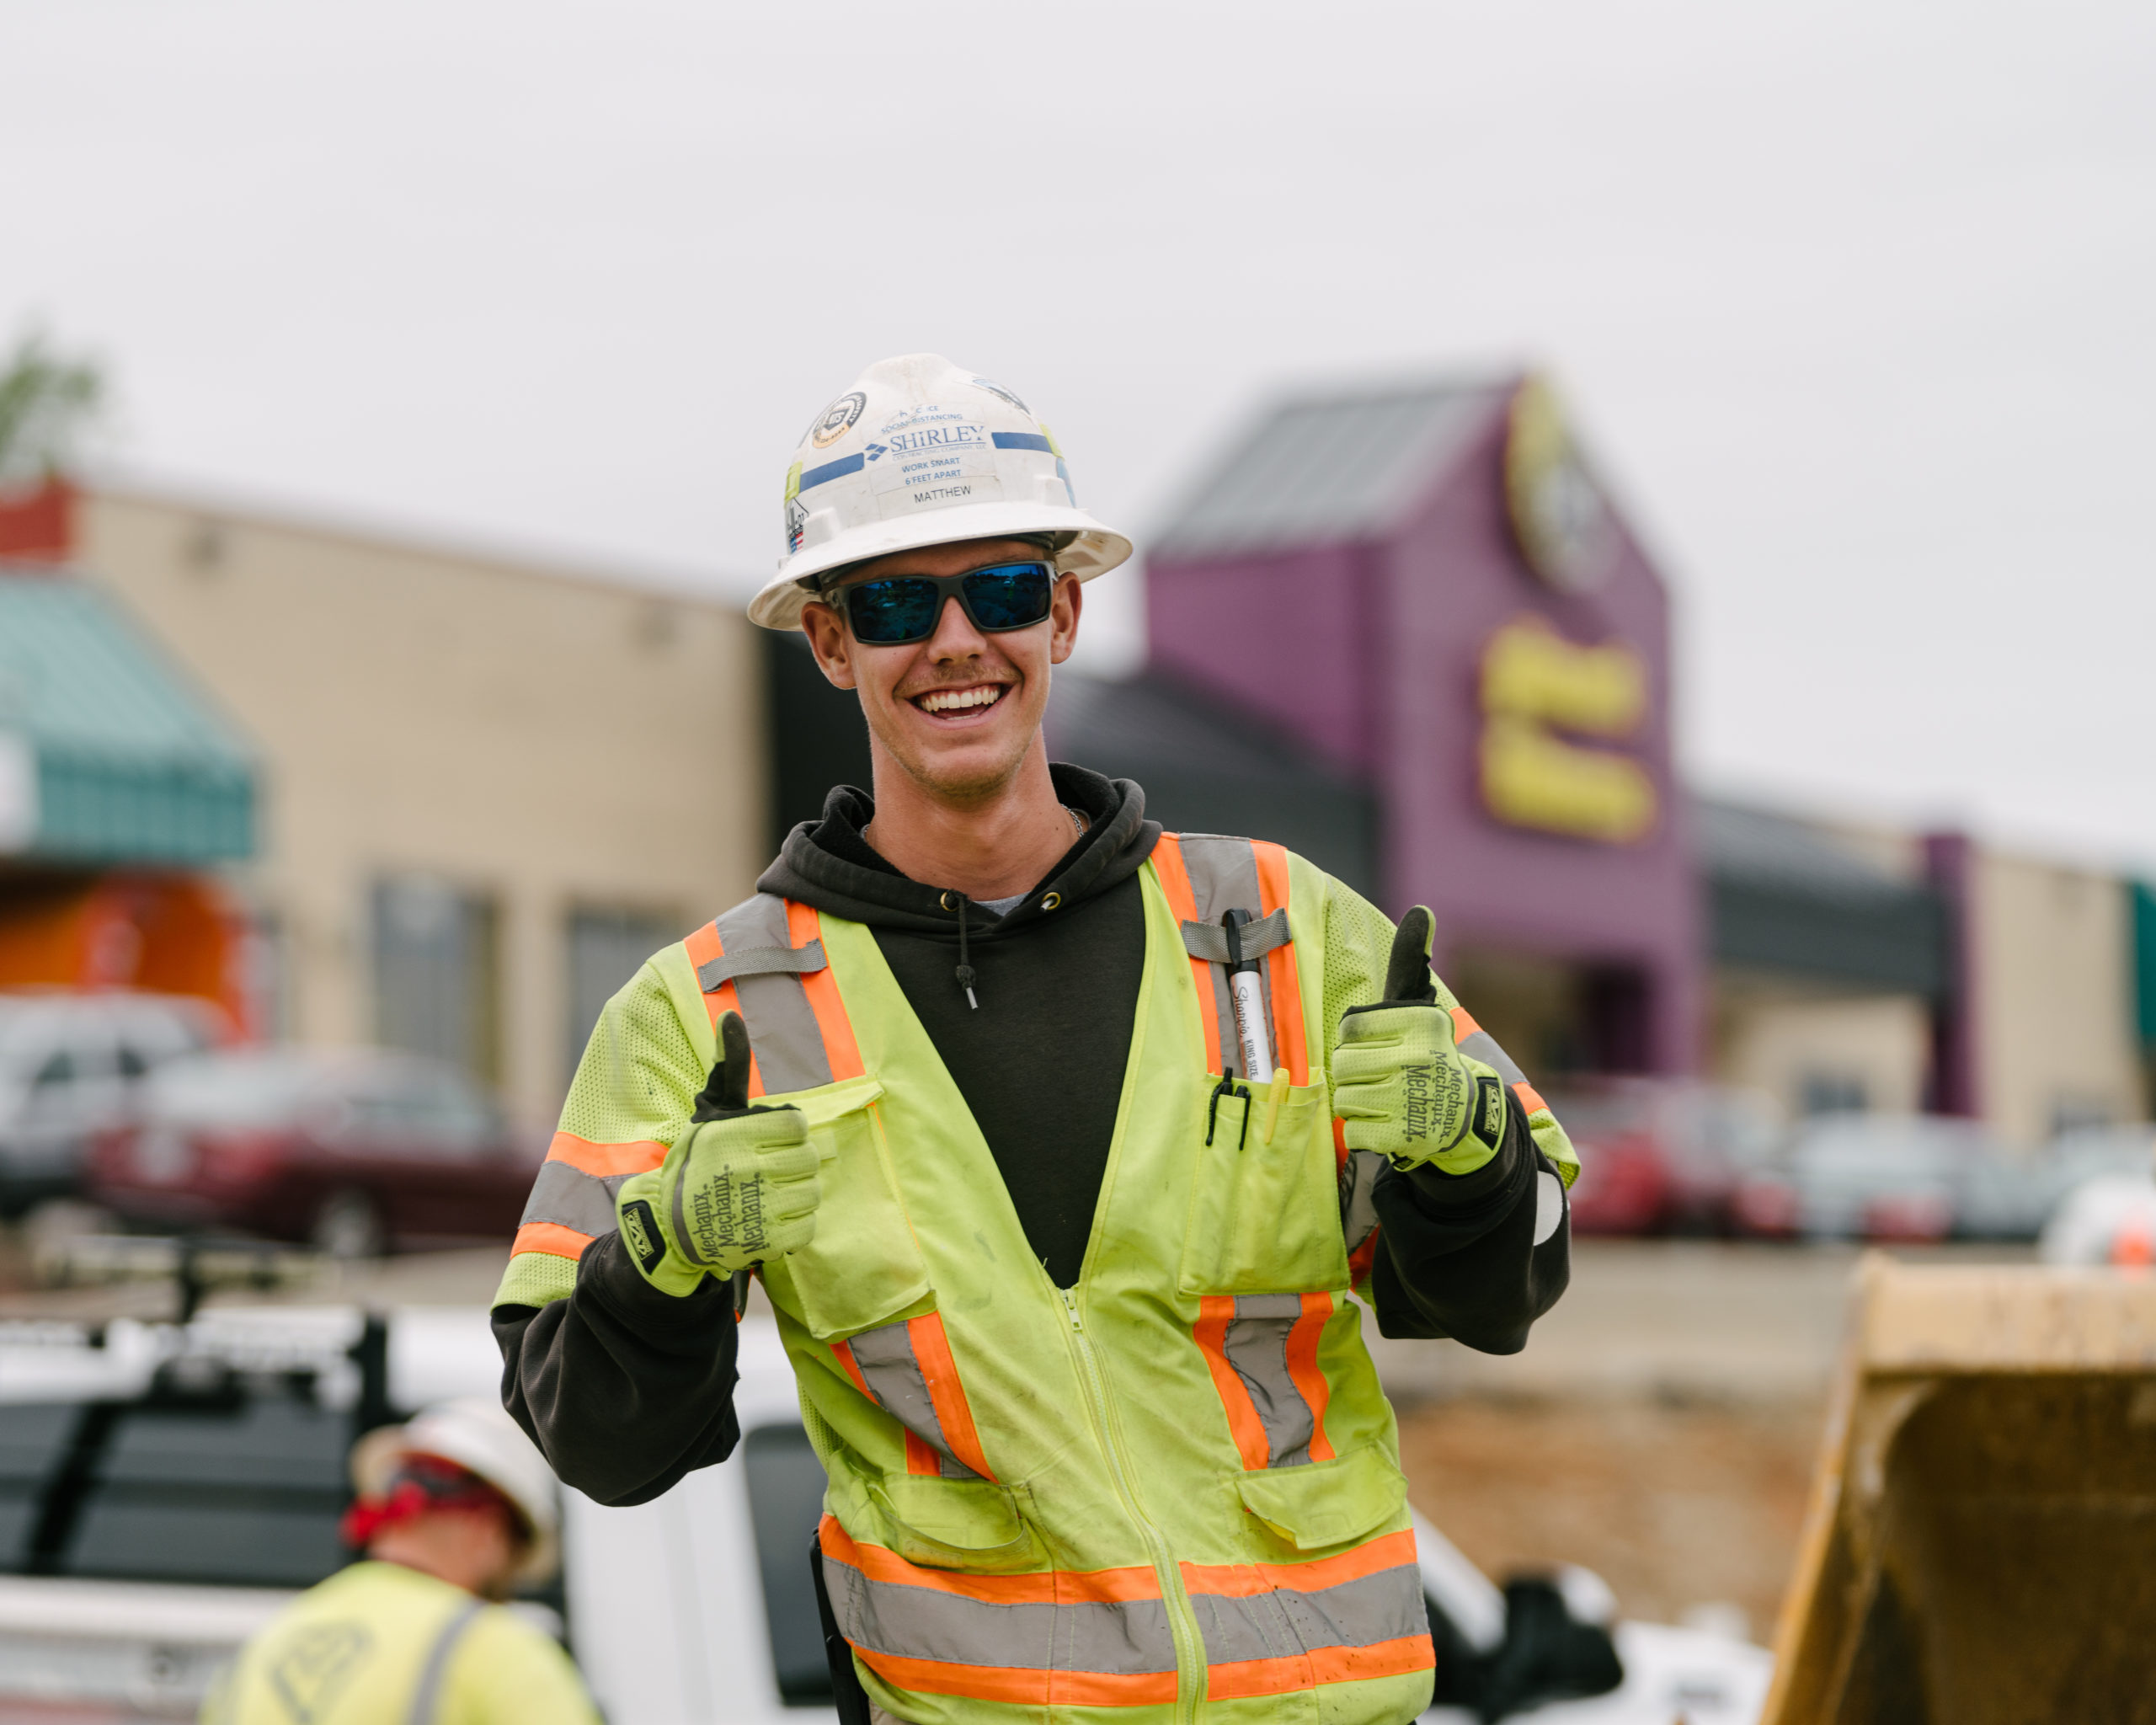 Smiling worker giving two thumbs up to the camera